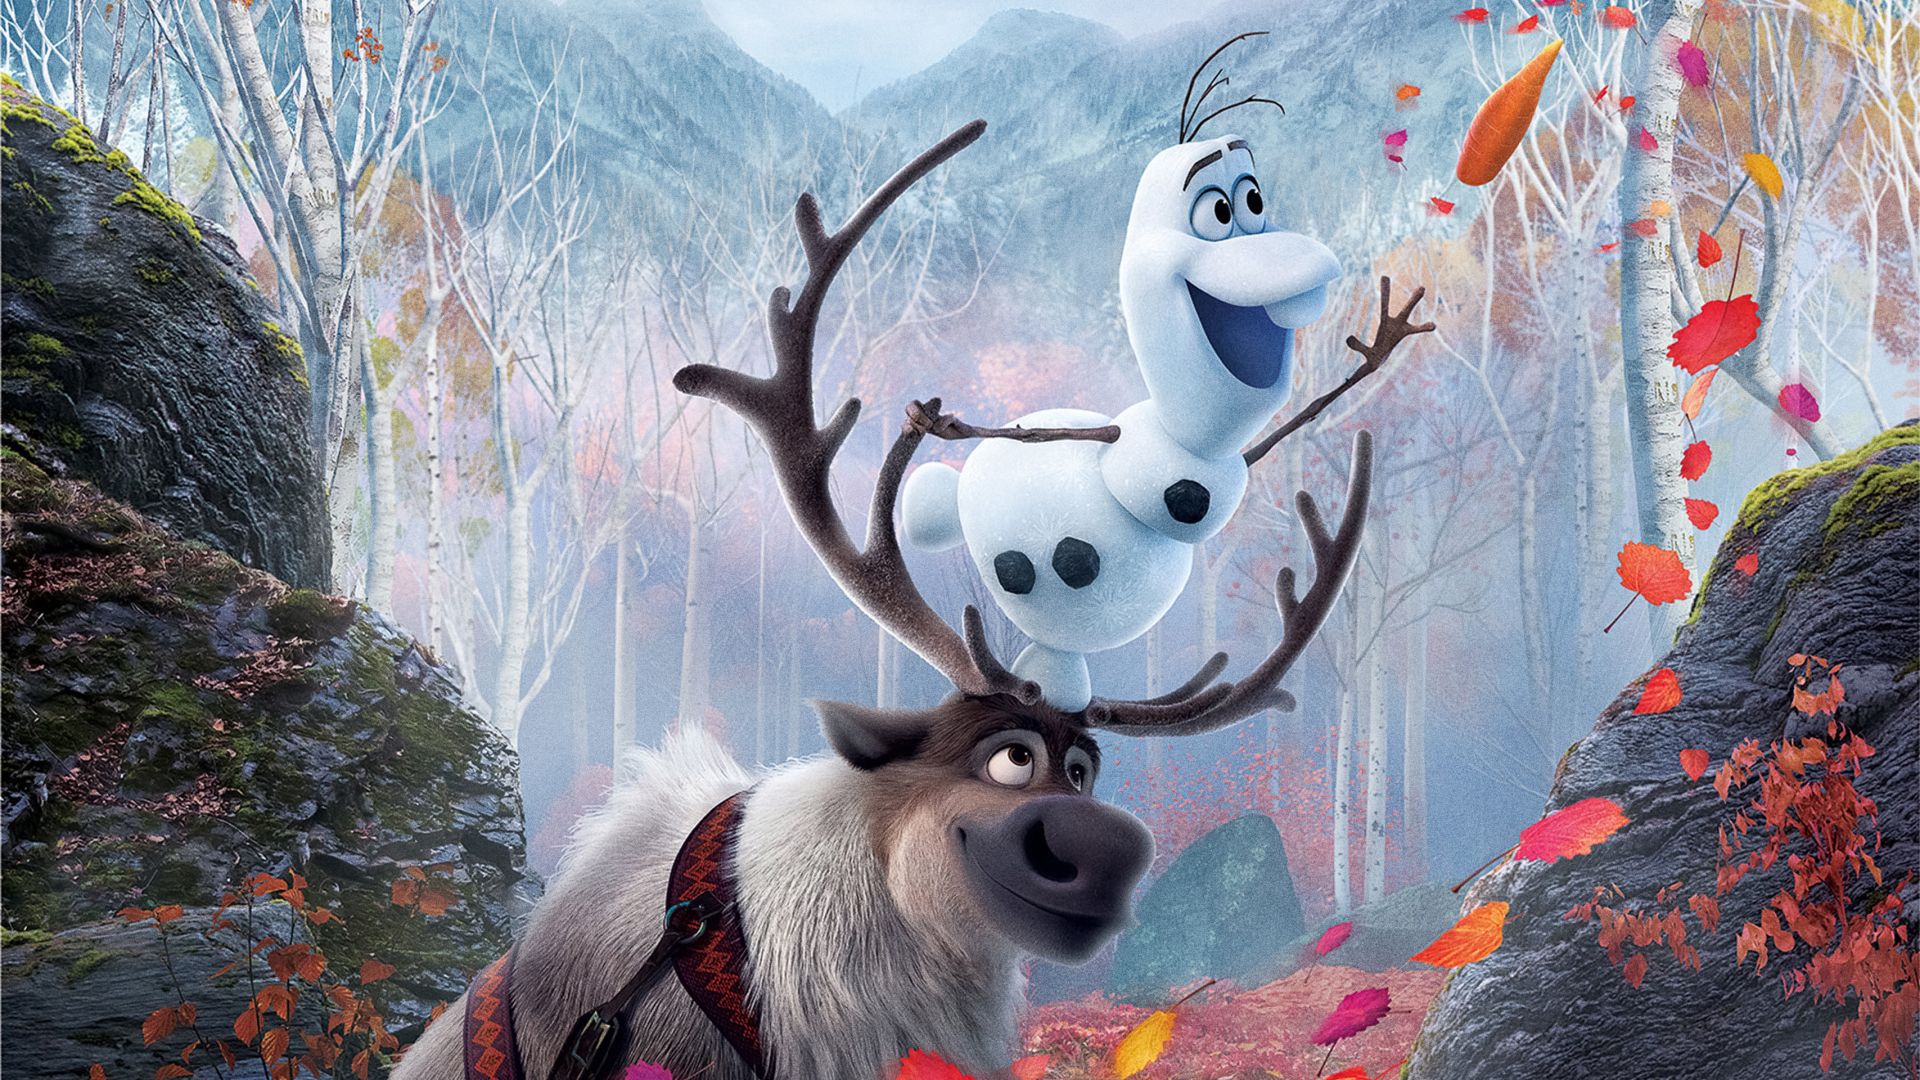 Frozen 2 Olaf and Sven Wallpaper